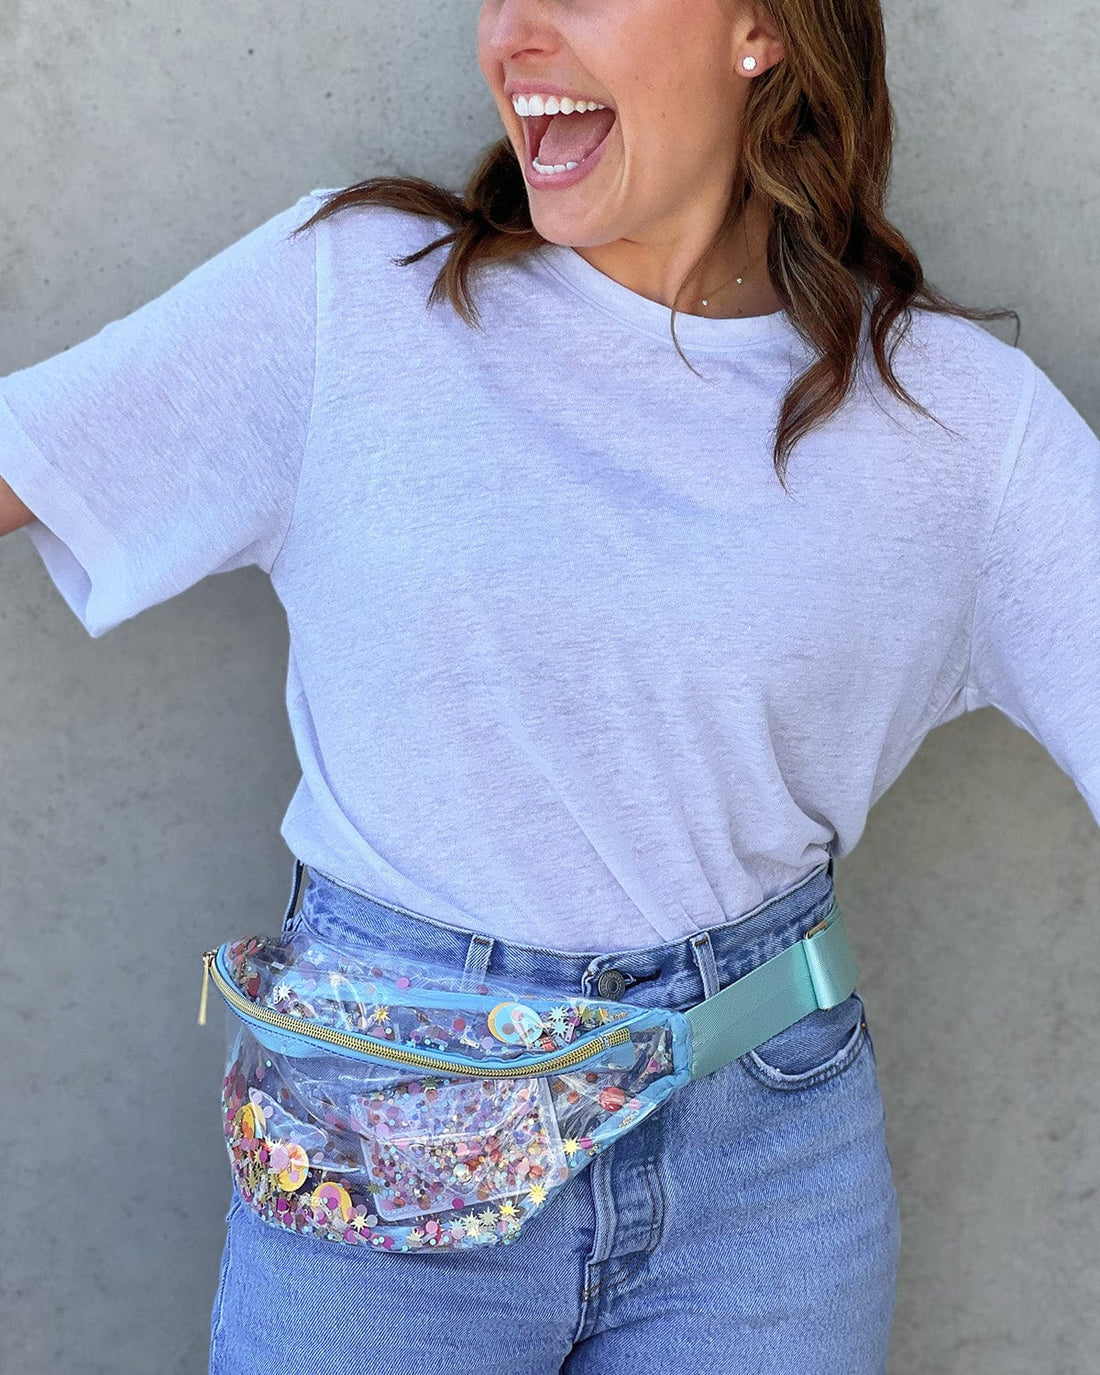 Shop Packed Party Celebrate Confetti Fanny Pack Belt Bag - Premium Bum Bag from Packed Party Online now at Spoiled Brat 